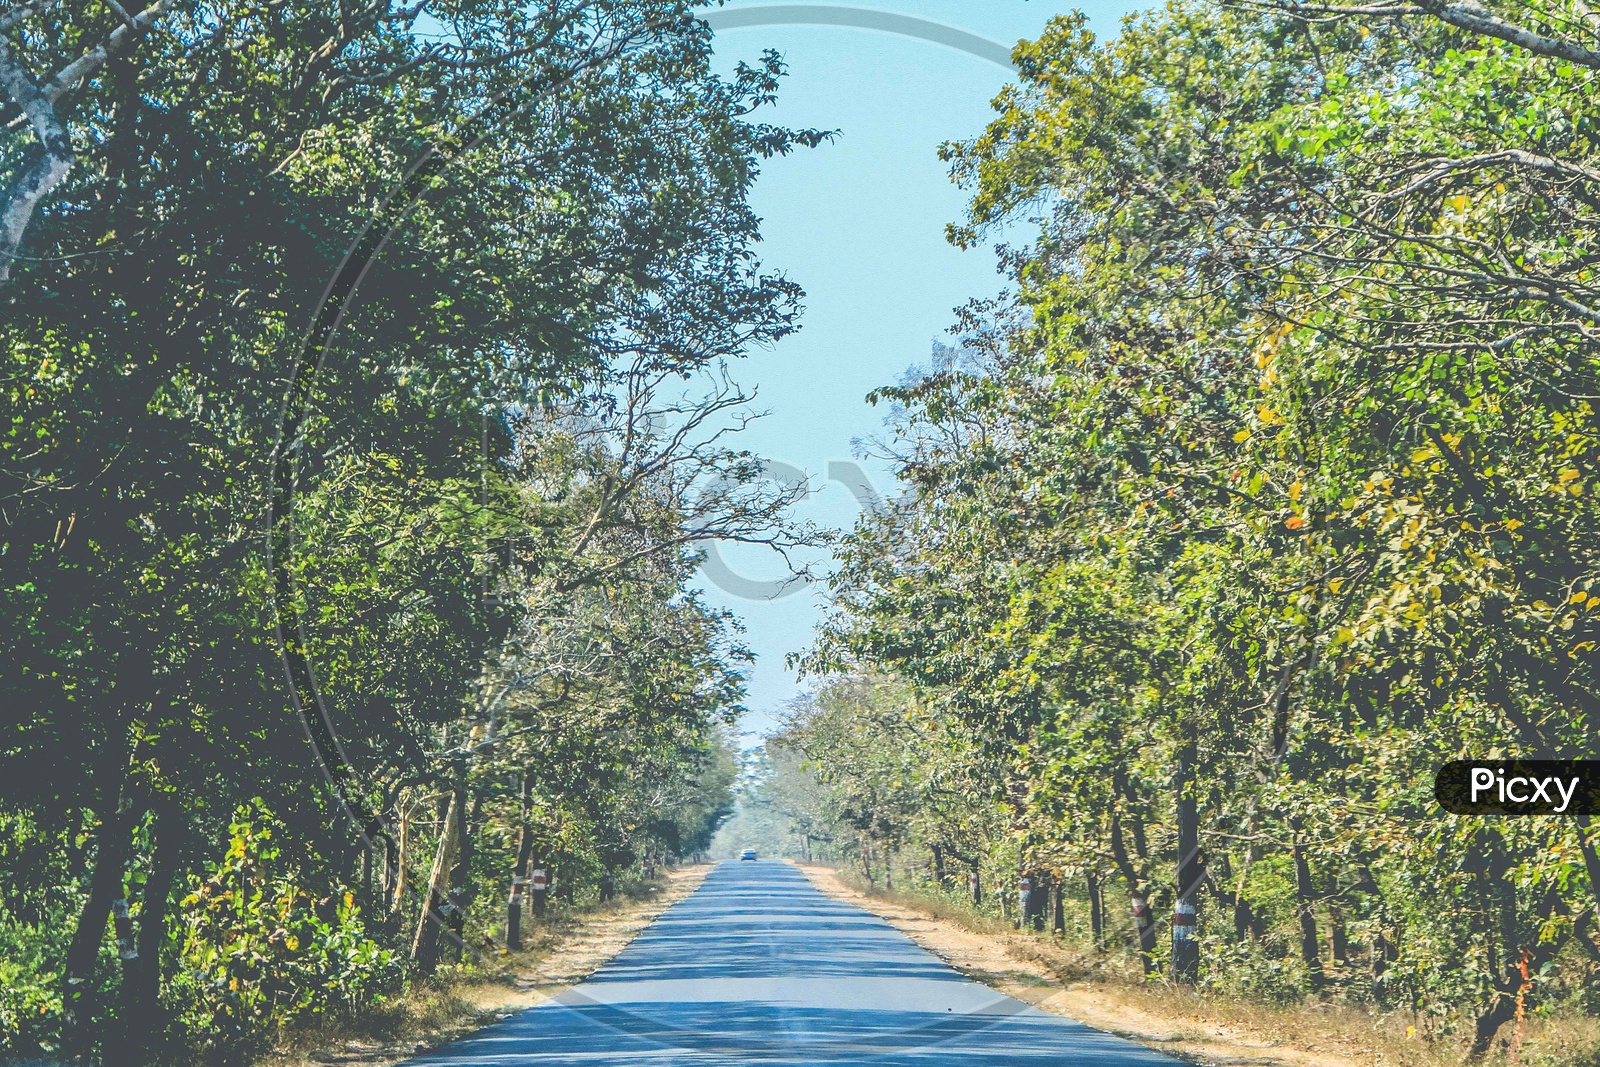 A Lone Thar Road With Trees on Both Sides of The Road in Rural Area